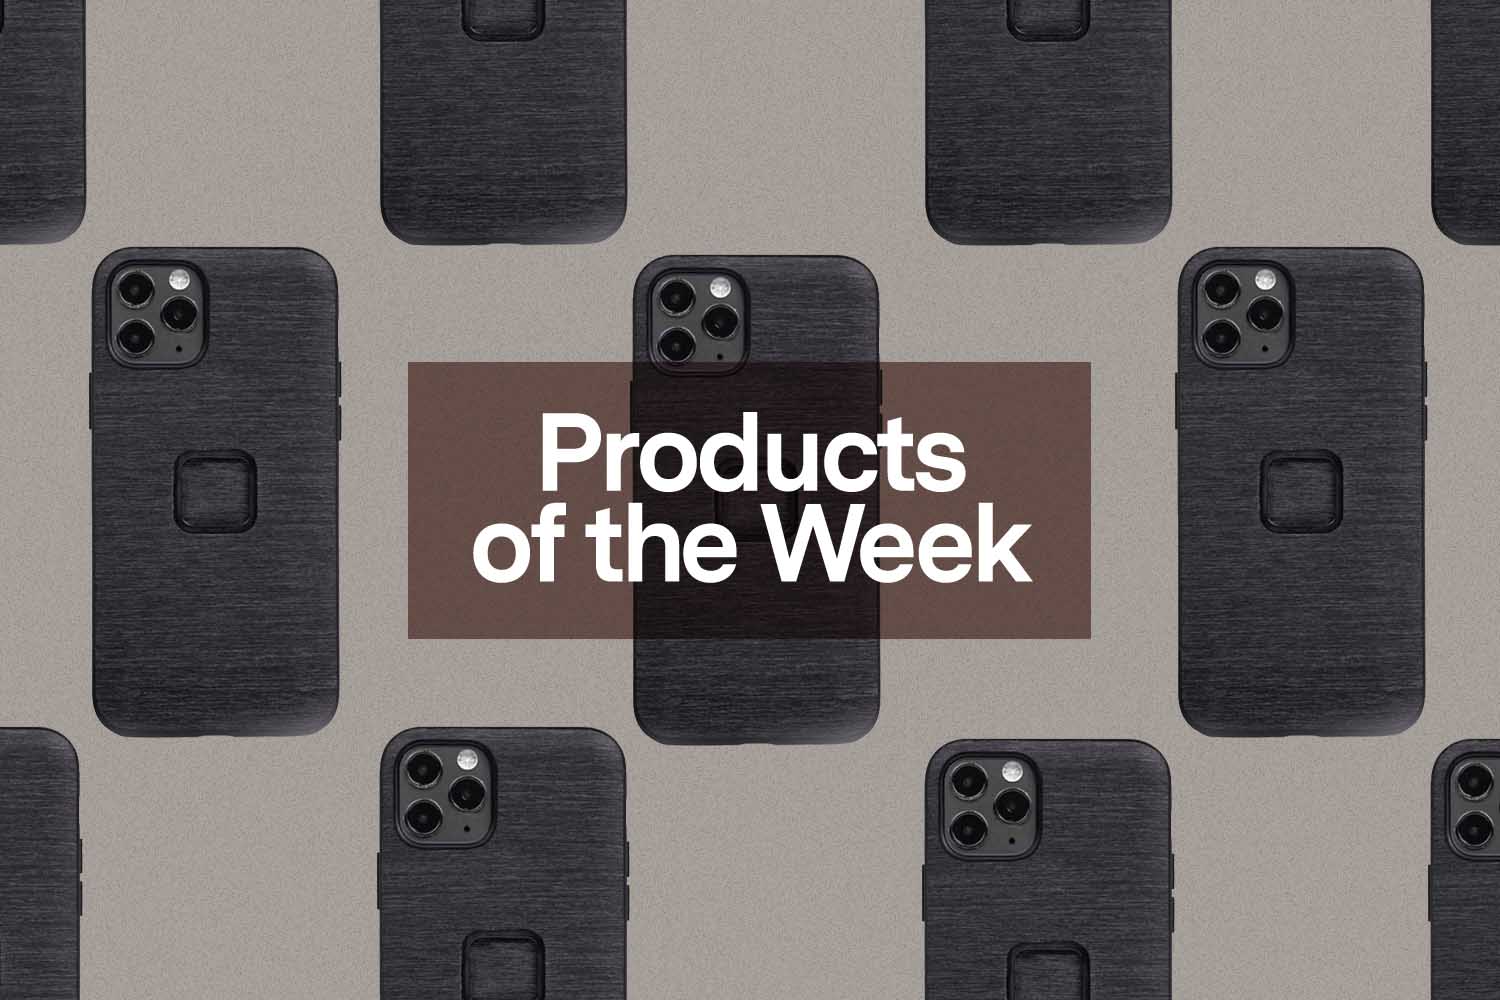 Products of the Week: Vans, Steamer Baskets and Magnetic Smartphone Accessories